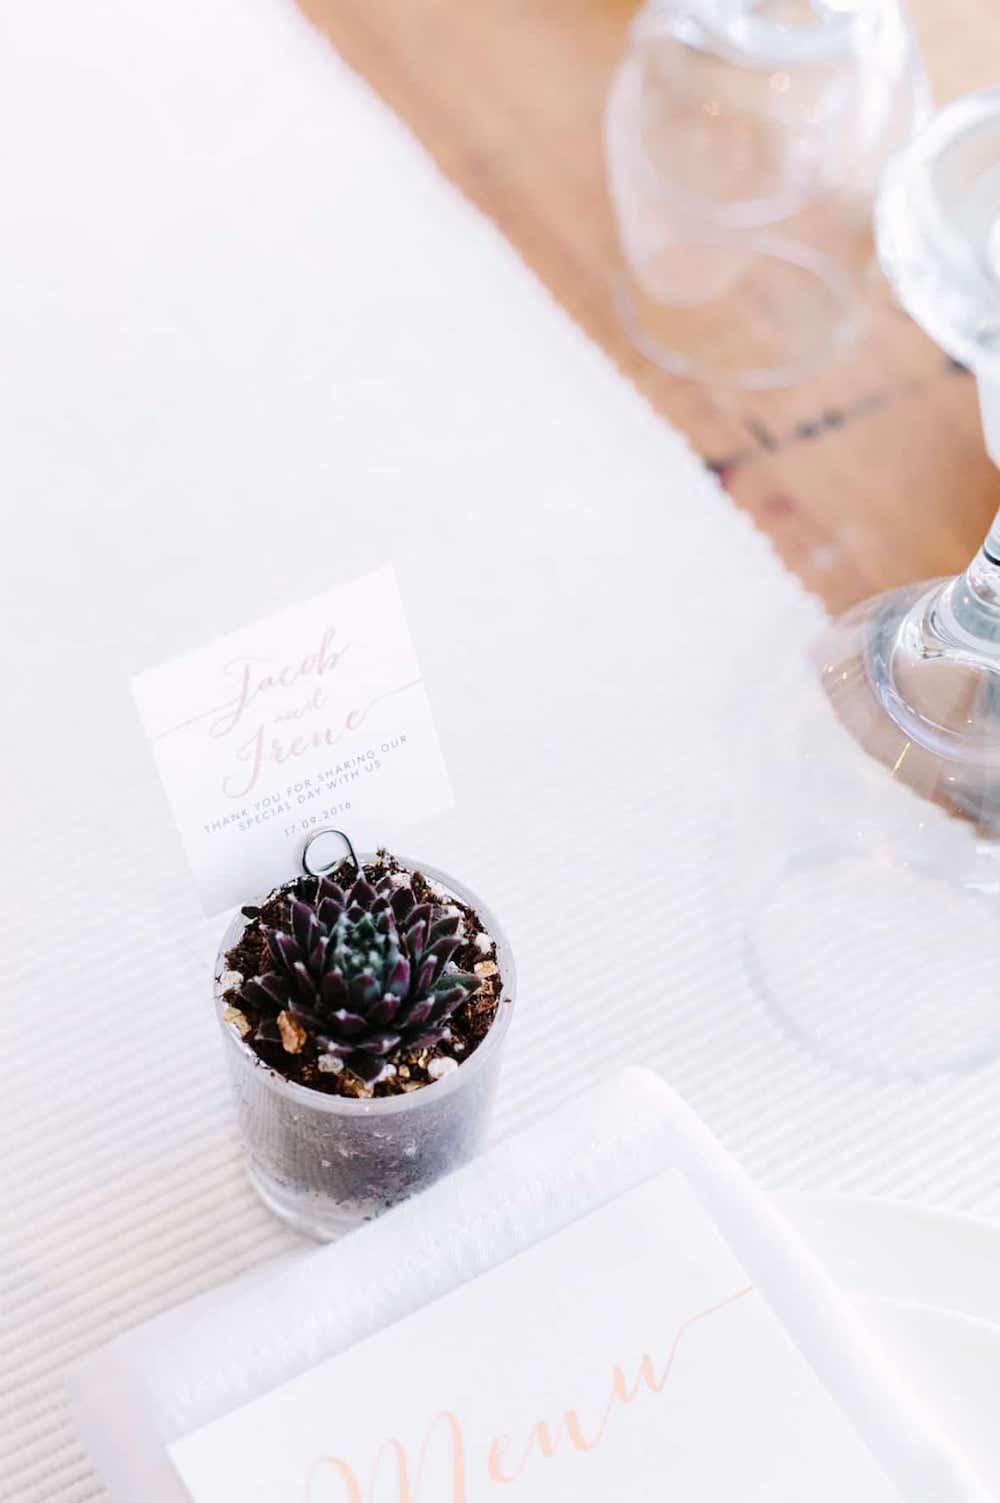 Cute Wedding Favours Cactus Plants Southern Highlands Weddings Inspiration